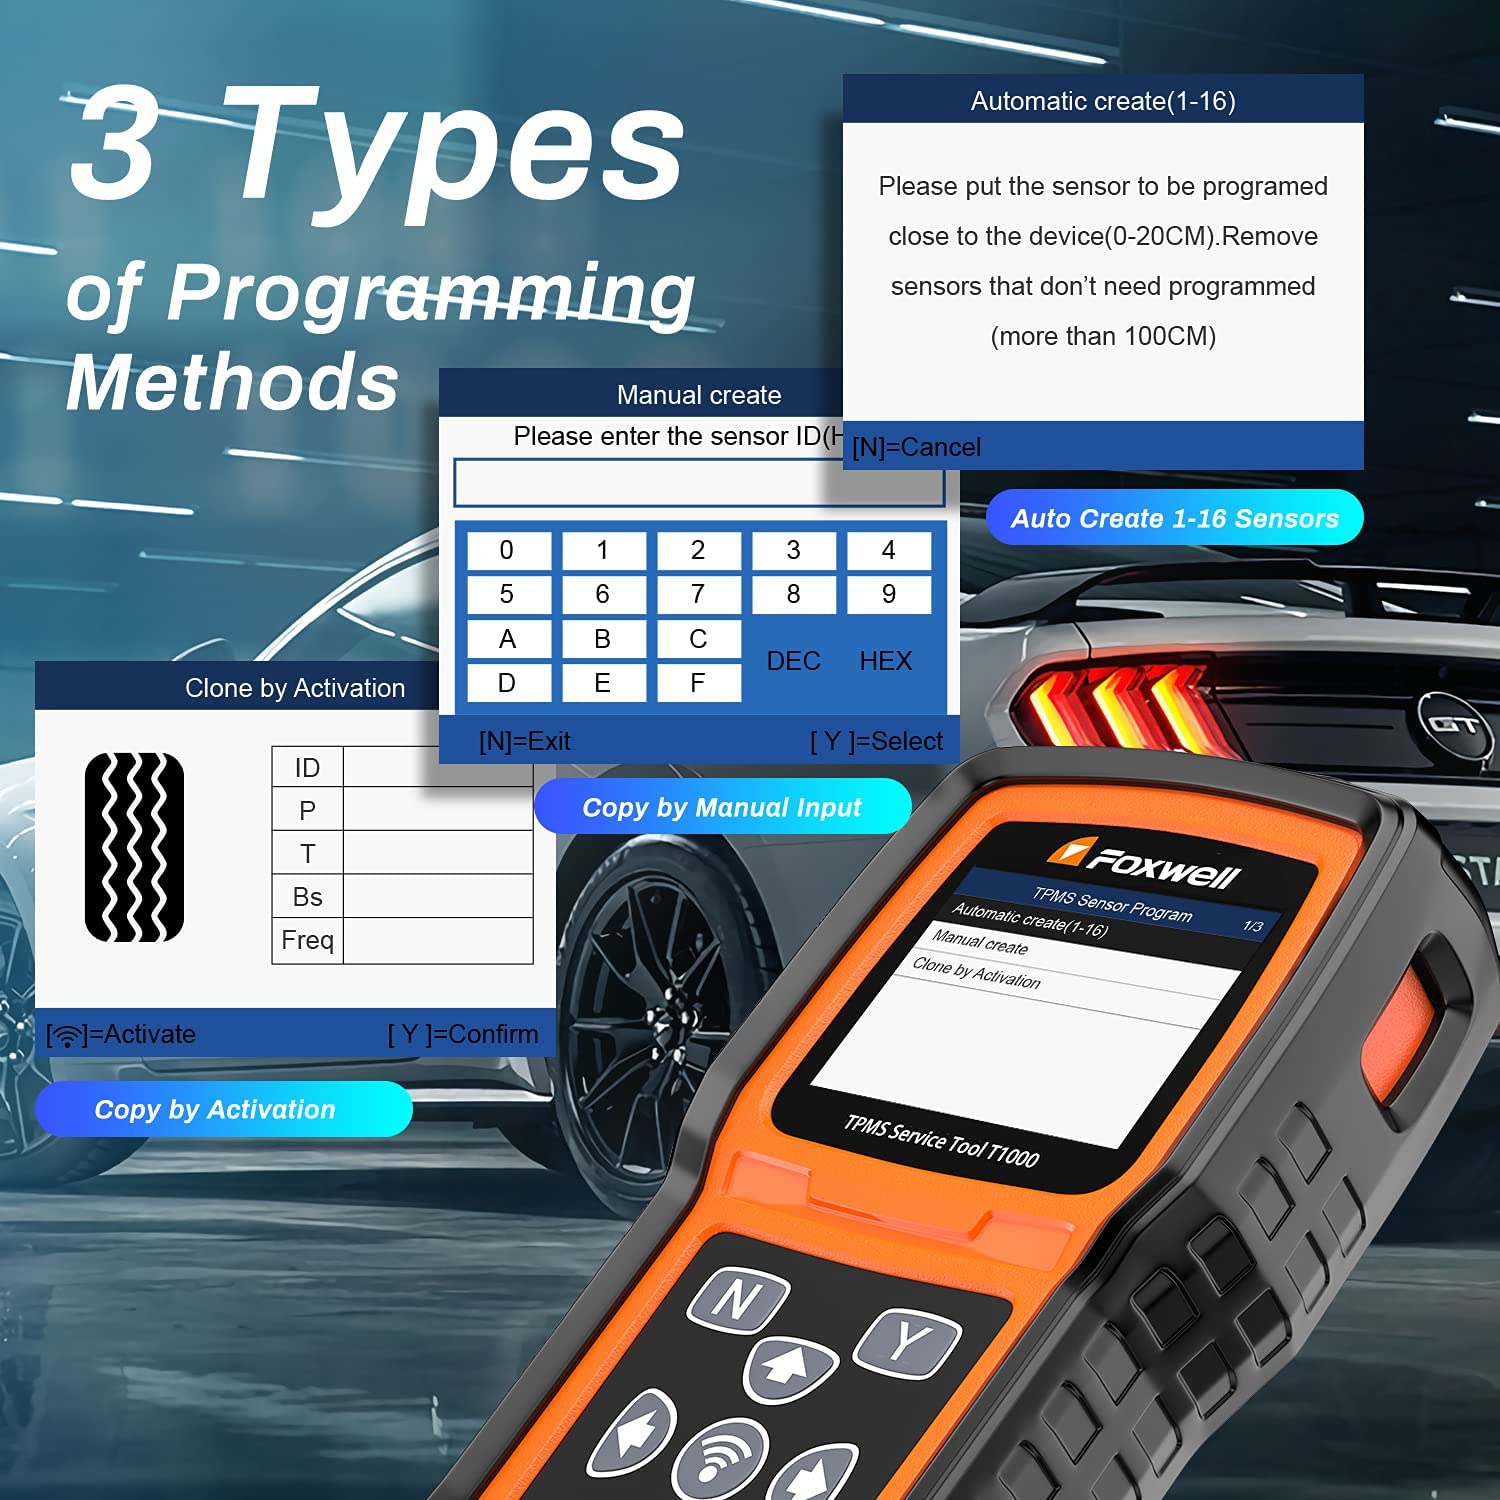 Foxwell T1000 TPMS Tool Programming Activate TPMS Sensors Check RF Key FOB Tire Pressure Monitoring System Auto Tester Detector